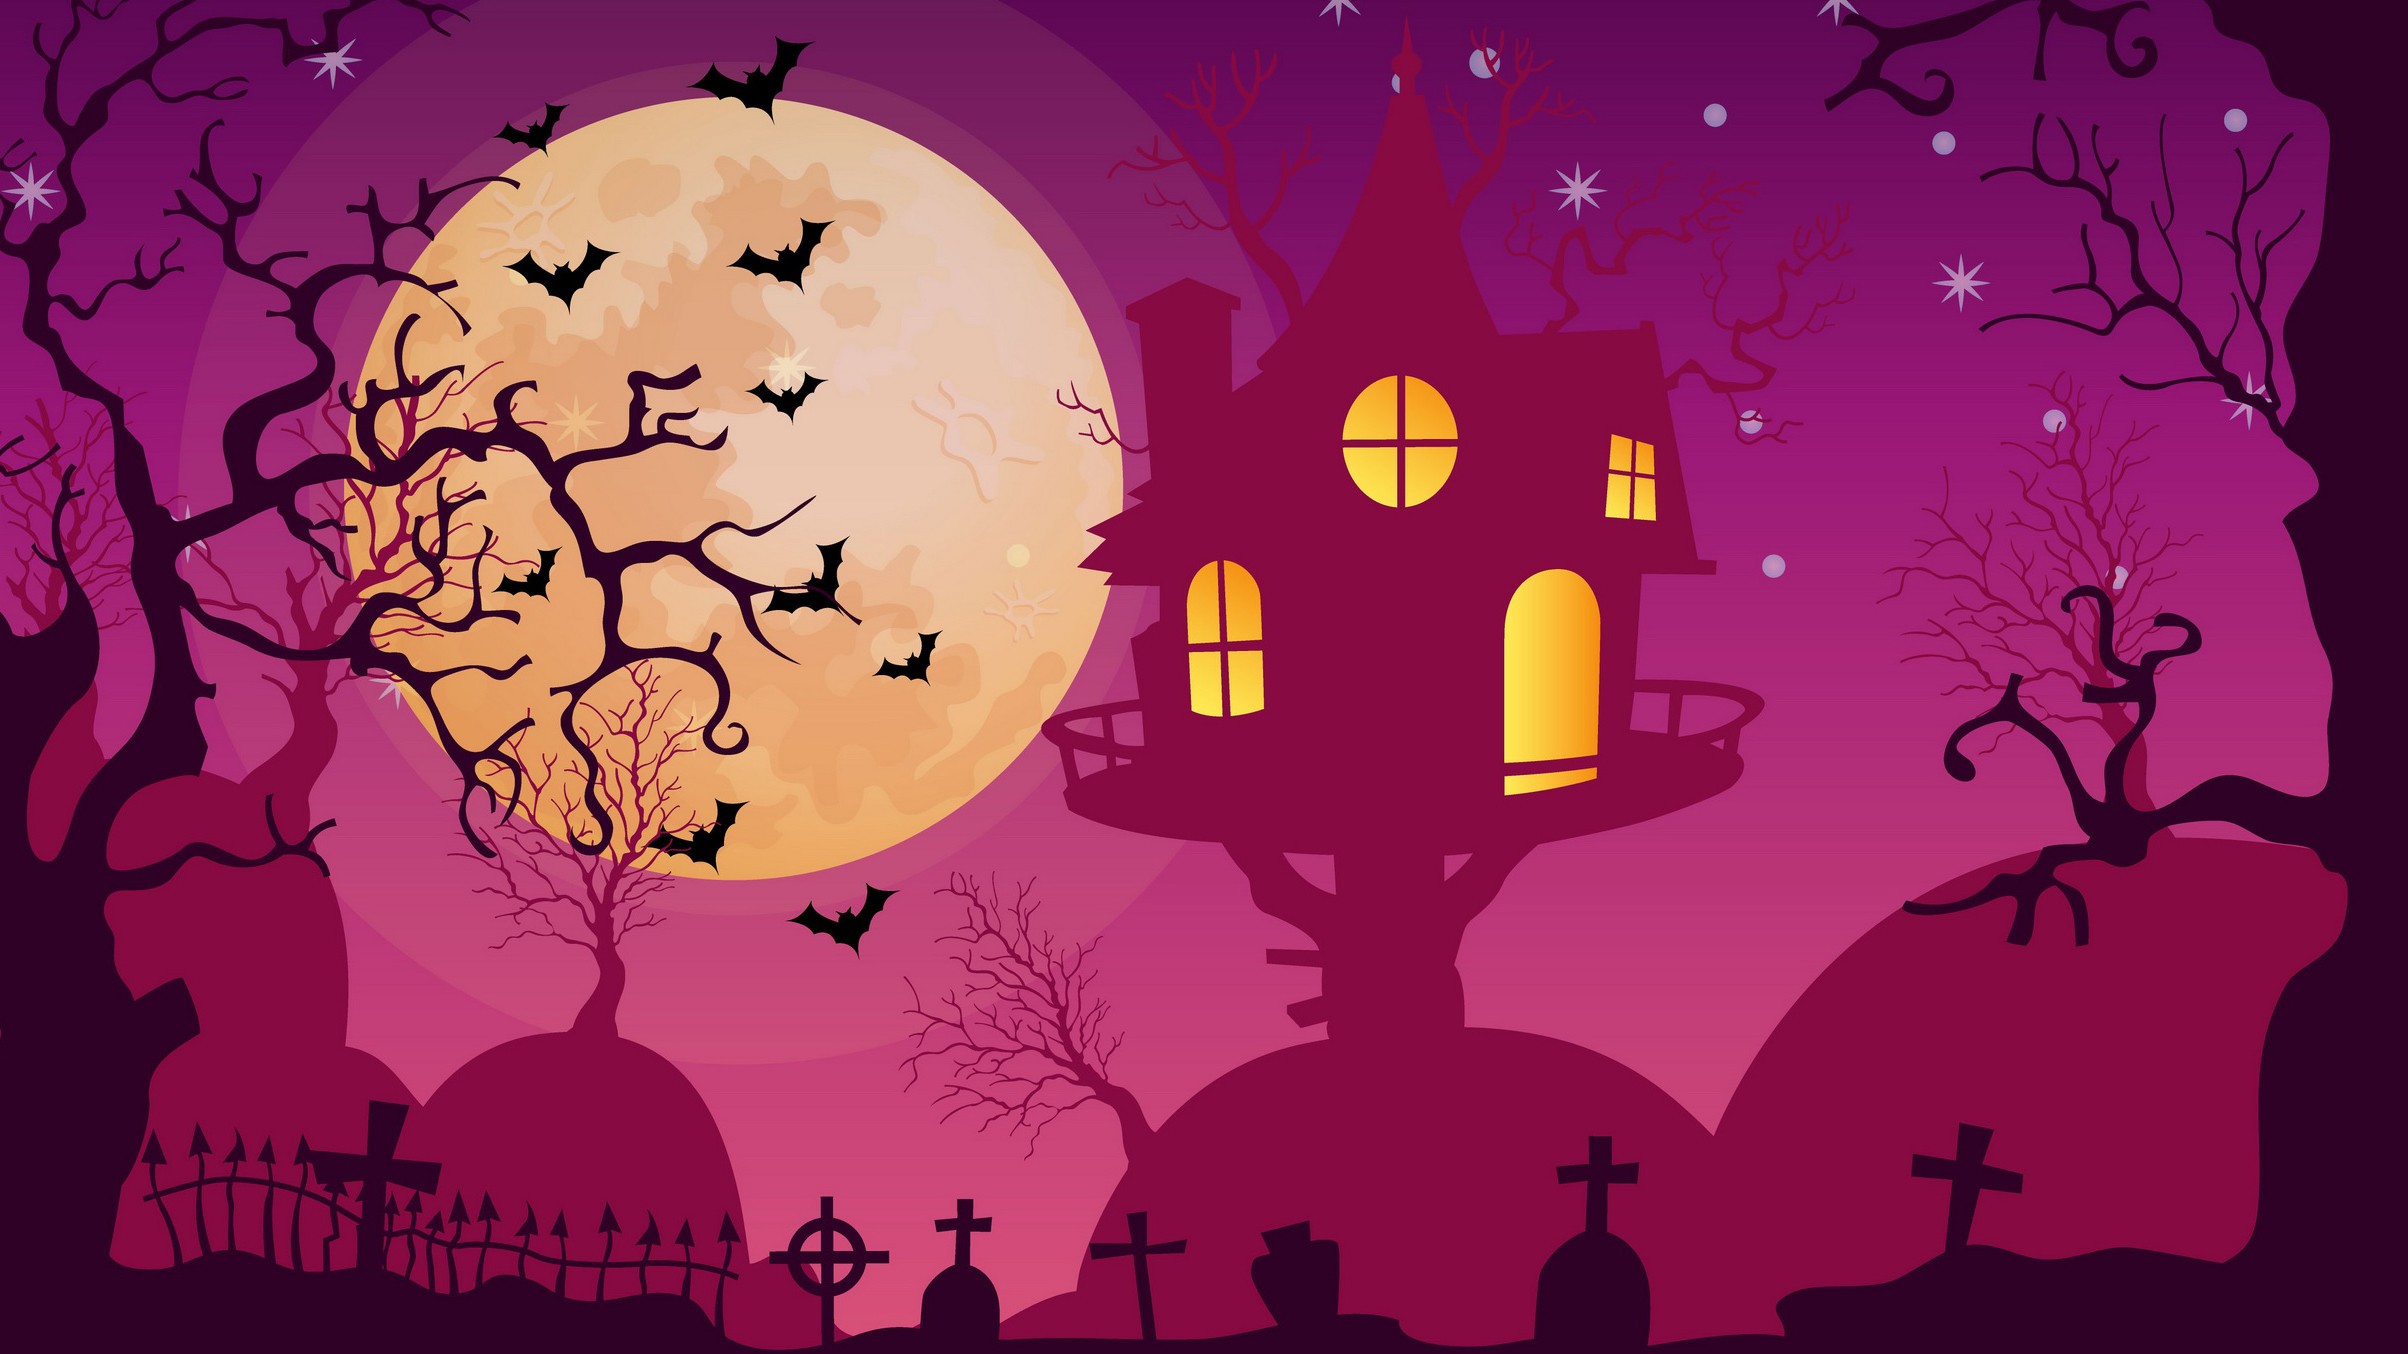 2408x1354 Halloween Backgrounds full HD Free Download for Desktop Laptop PC